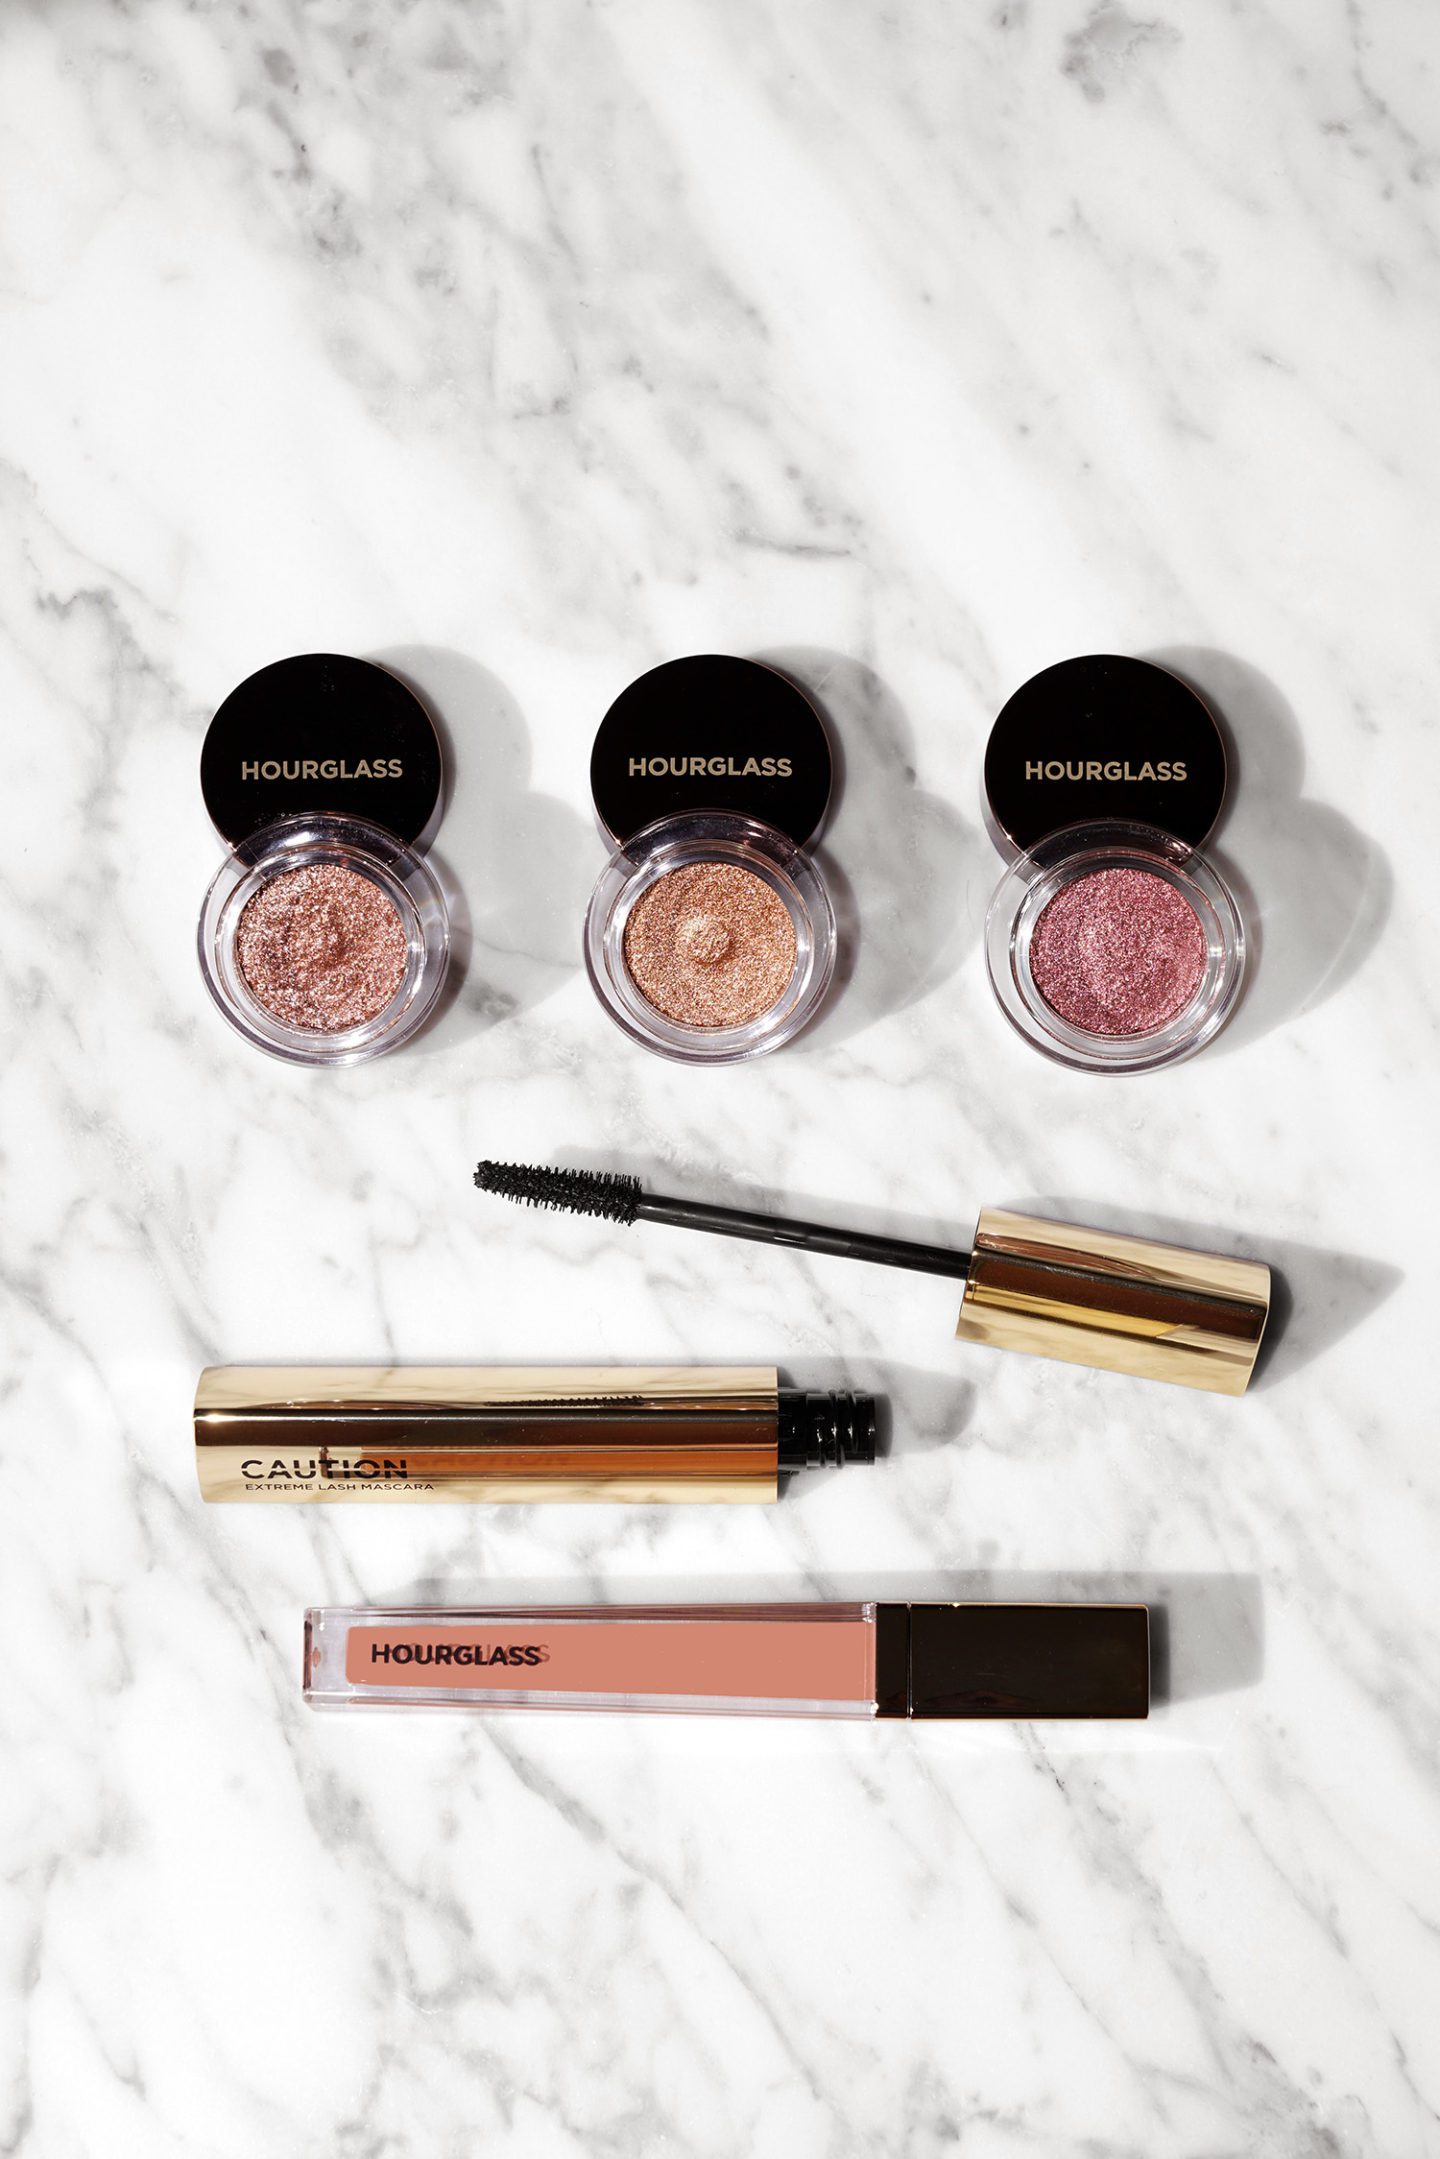 Hourglass Haul New Scattered Light and Nordstrom Eye/Lip Duo Spark | The beauty look book